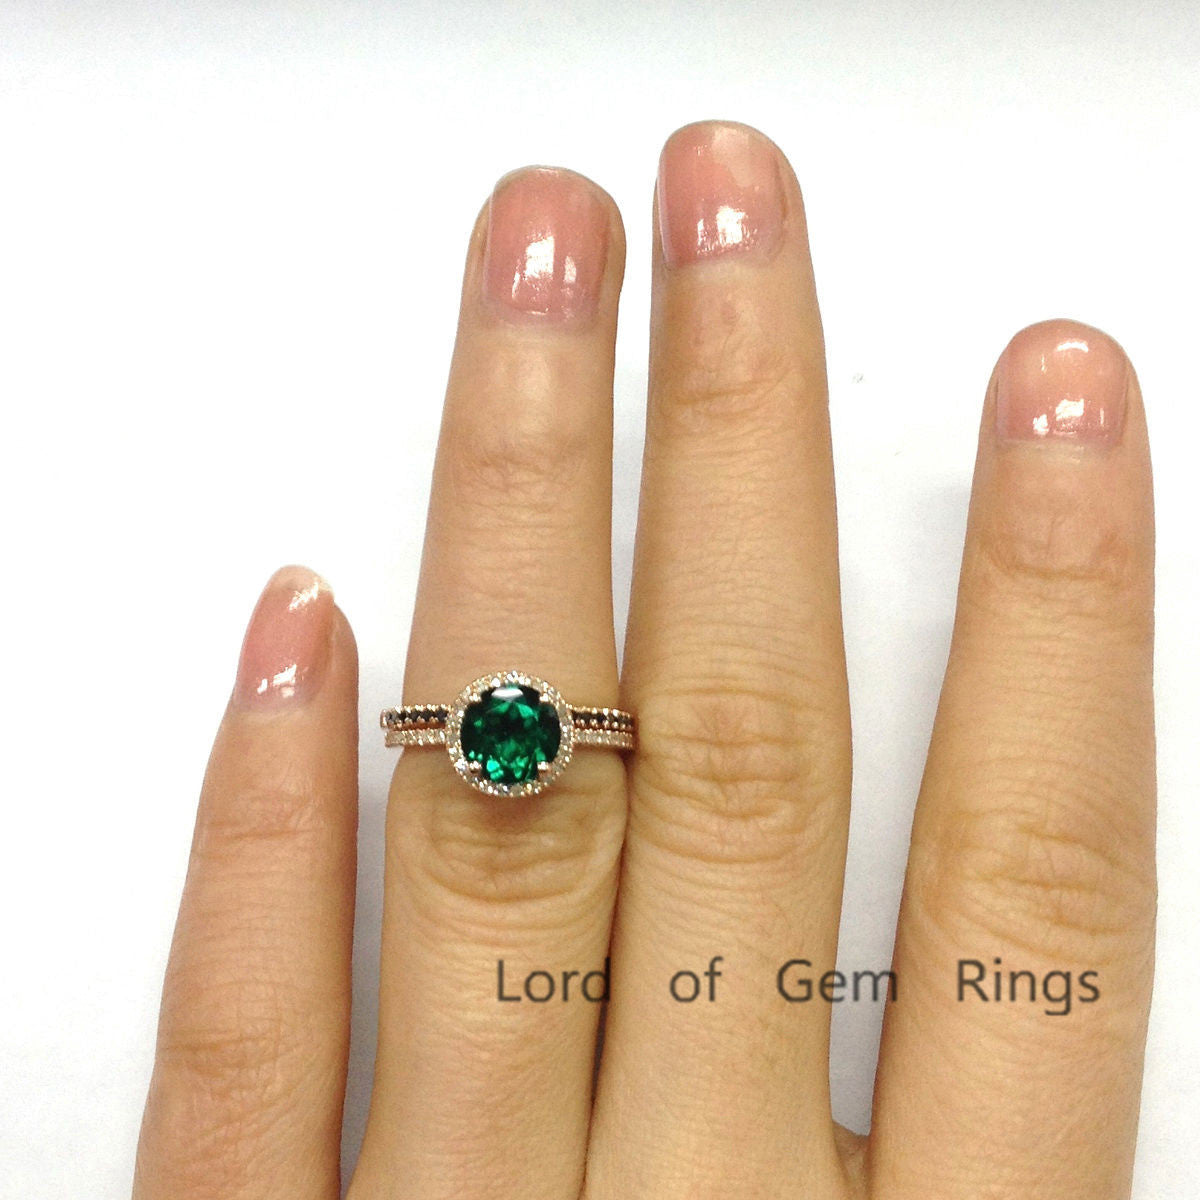 Round Emerald Engagement Ring Sets Pave Black Diamond Wedding Band 14K Rose Gold 7mm - Lord of Gem Rings - 5